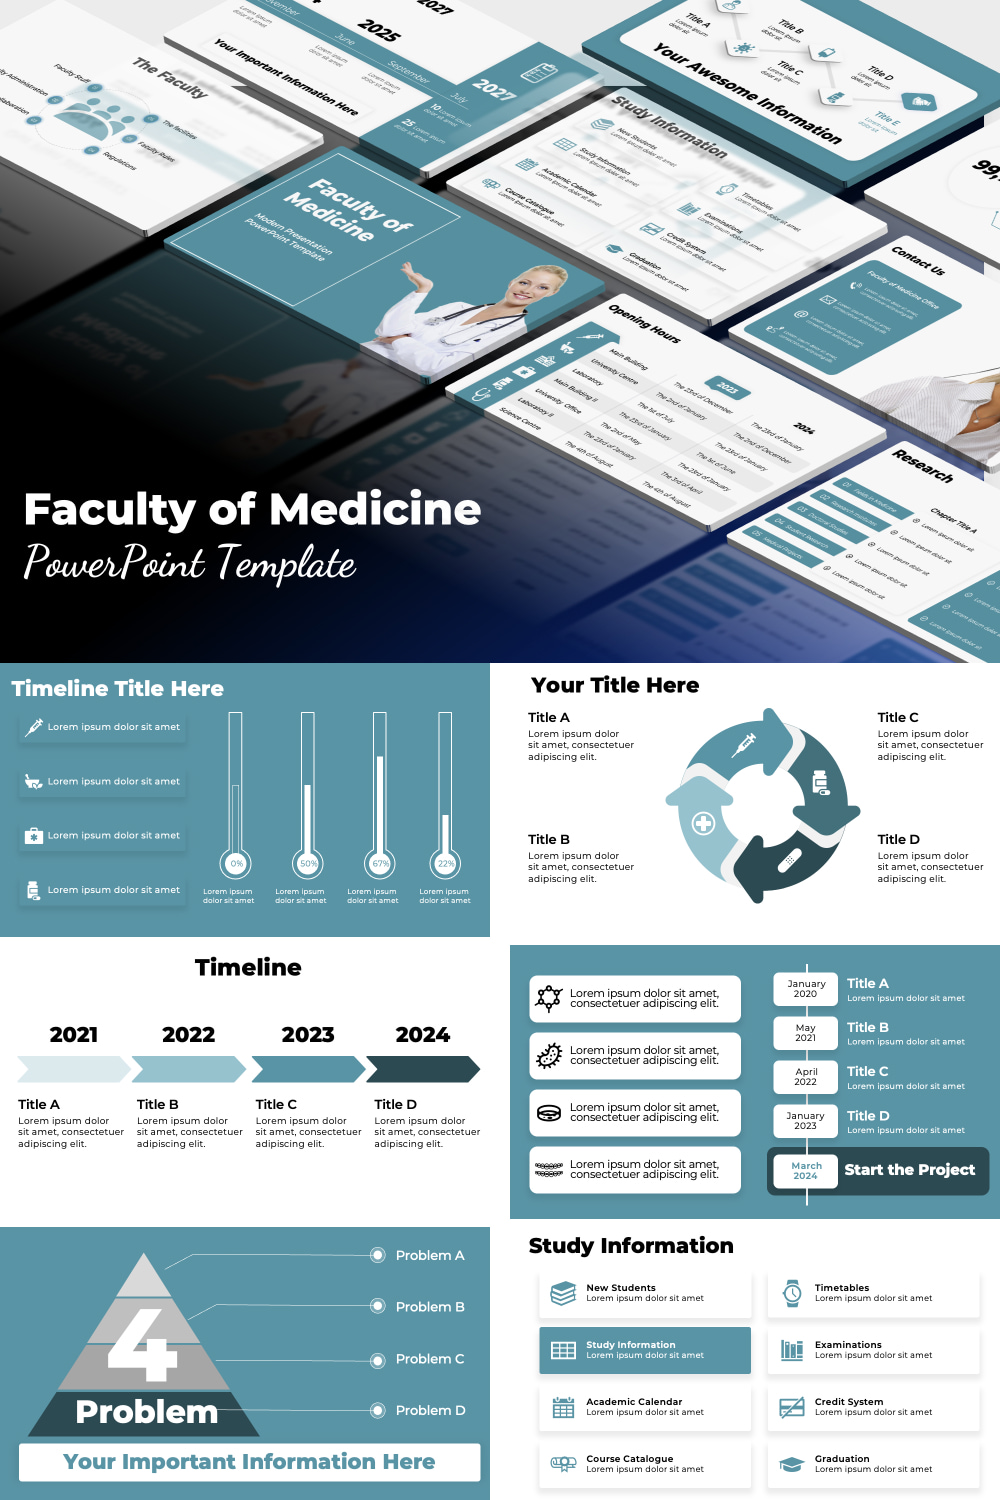 Faculty of Medicine Powerpoint Template pinterest preview image.